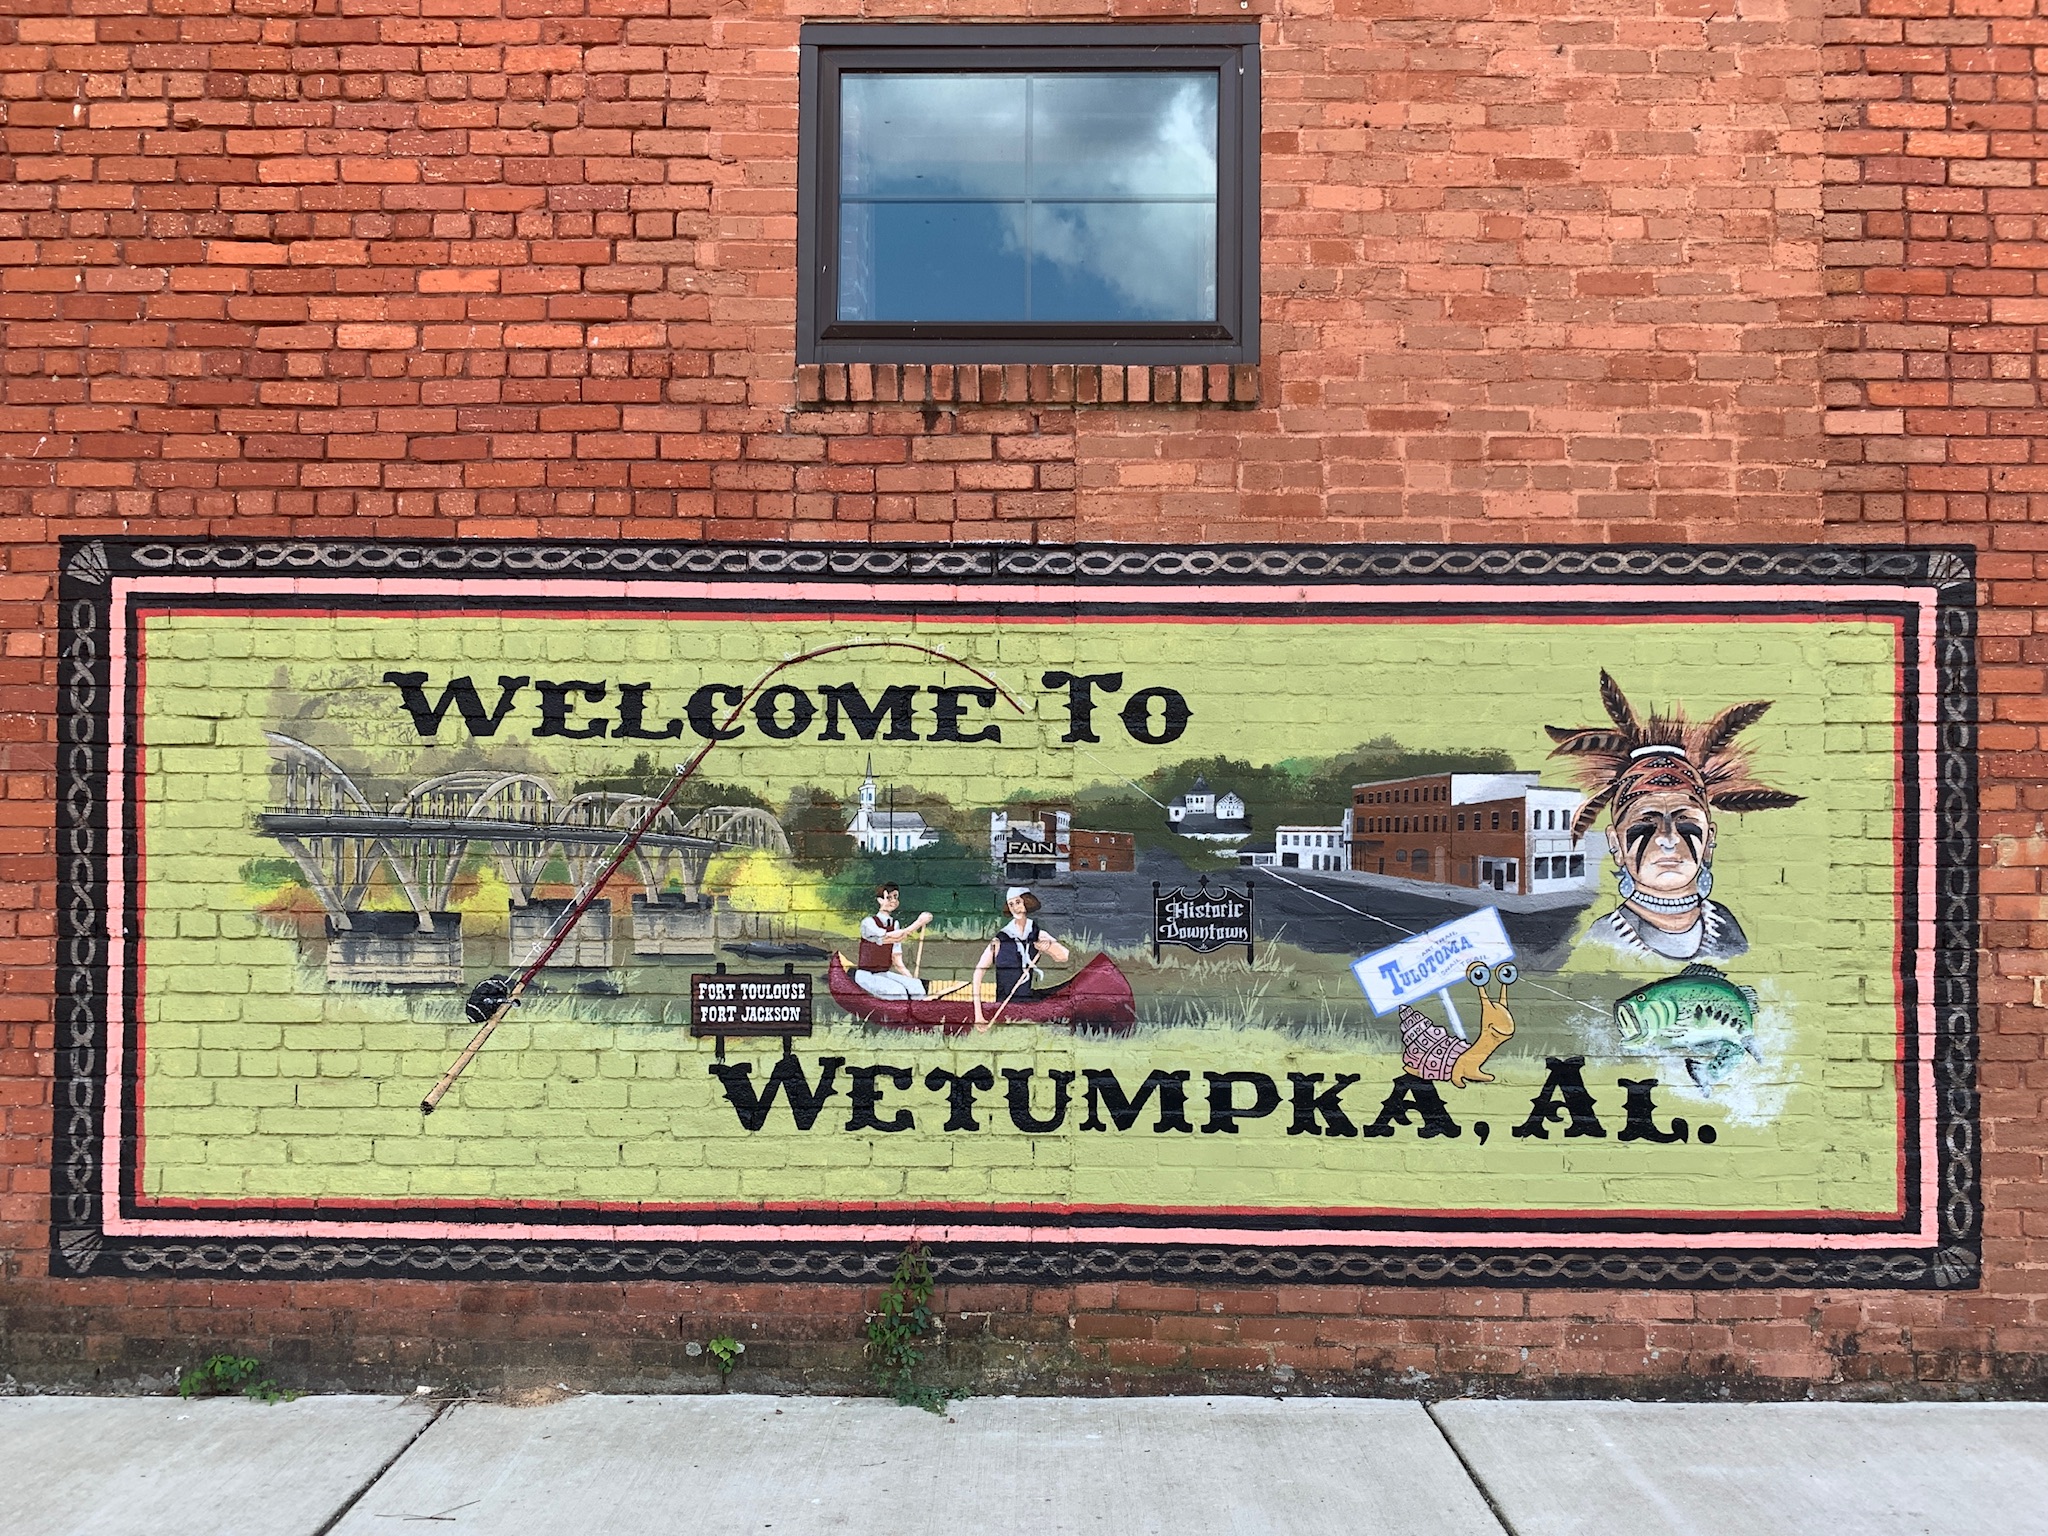 Welcome to Wetumpka AL